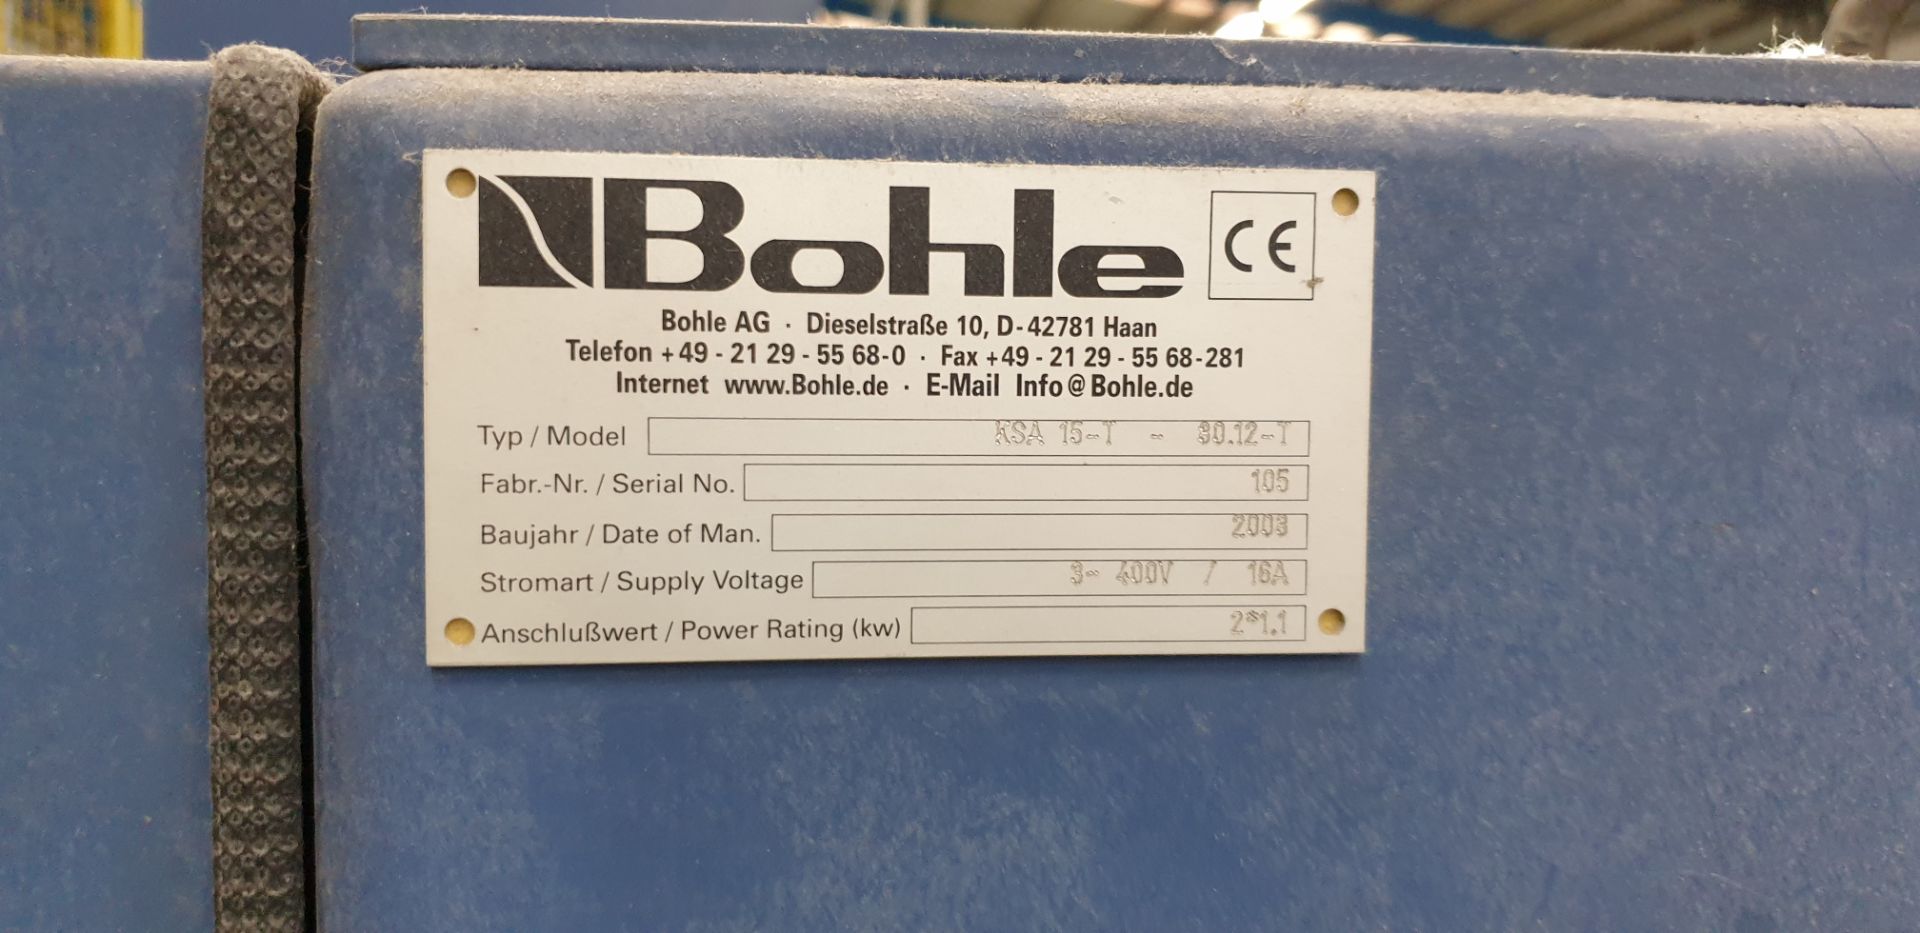 1: Bohle KSA 15-T-30.12-T Arrising Machine Complete with Extraction Serial Number: 105 Year of Manuf - Image 4 of 8